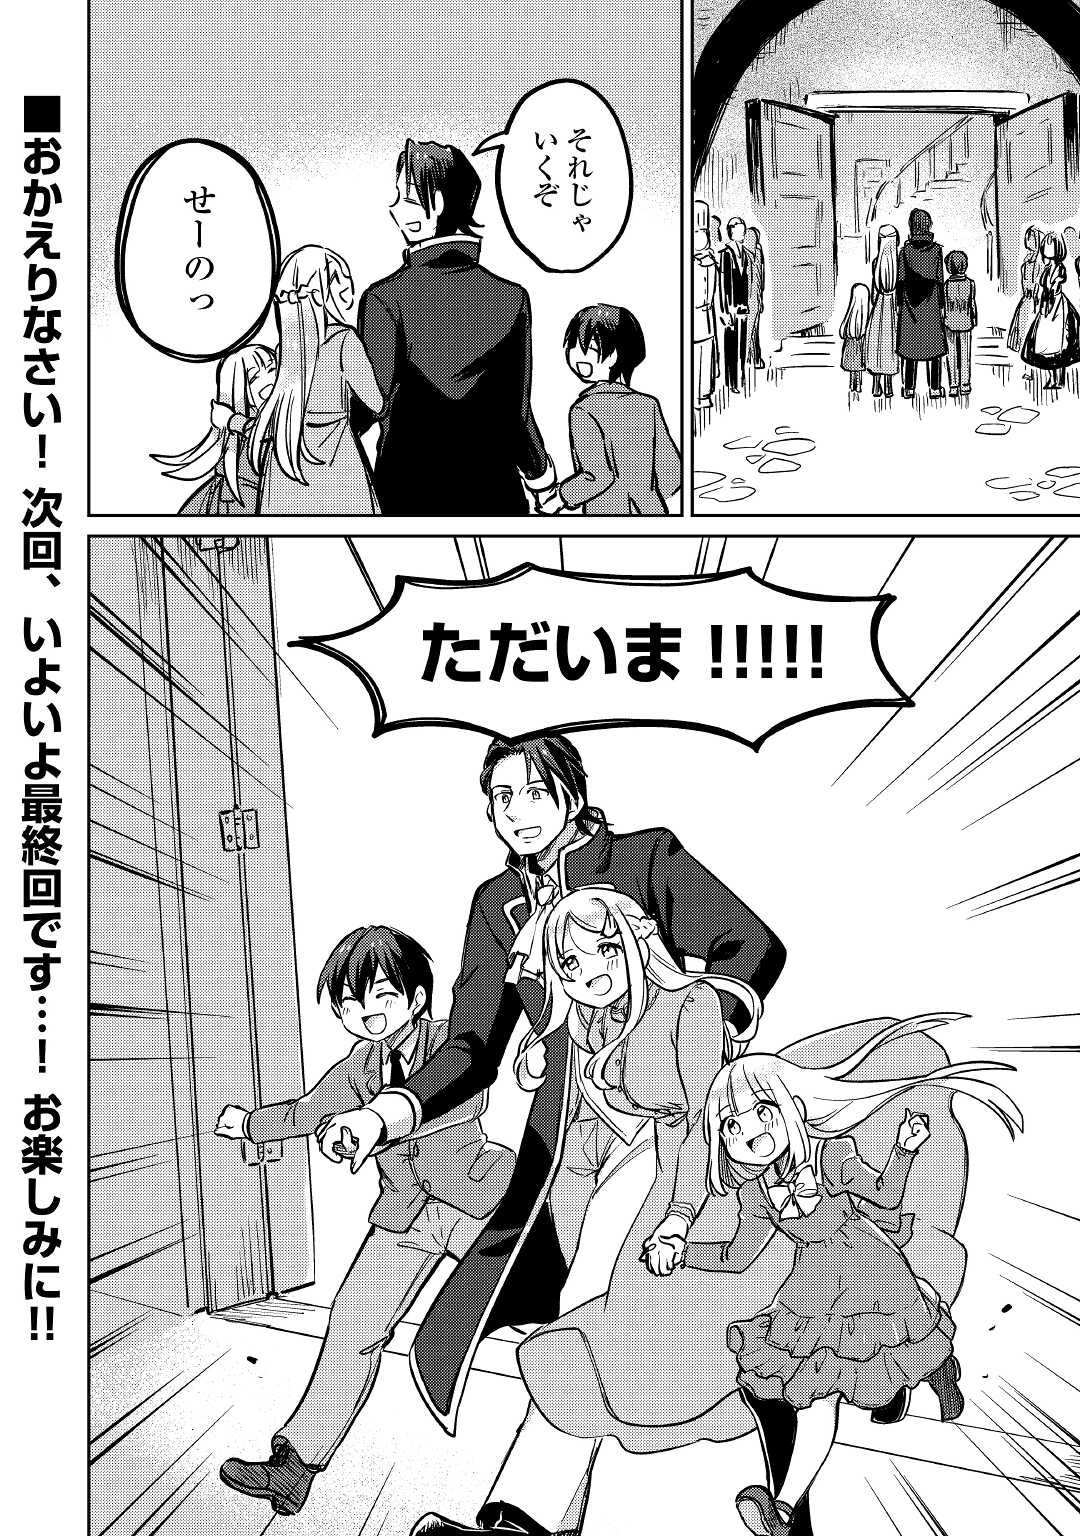 The Former Structural Researcher’s Story of Otherworldly Adventure 第41話 - Page 36